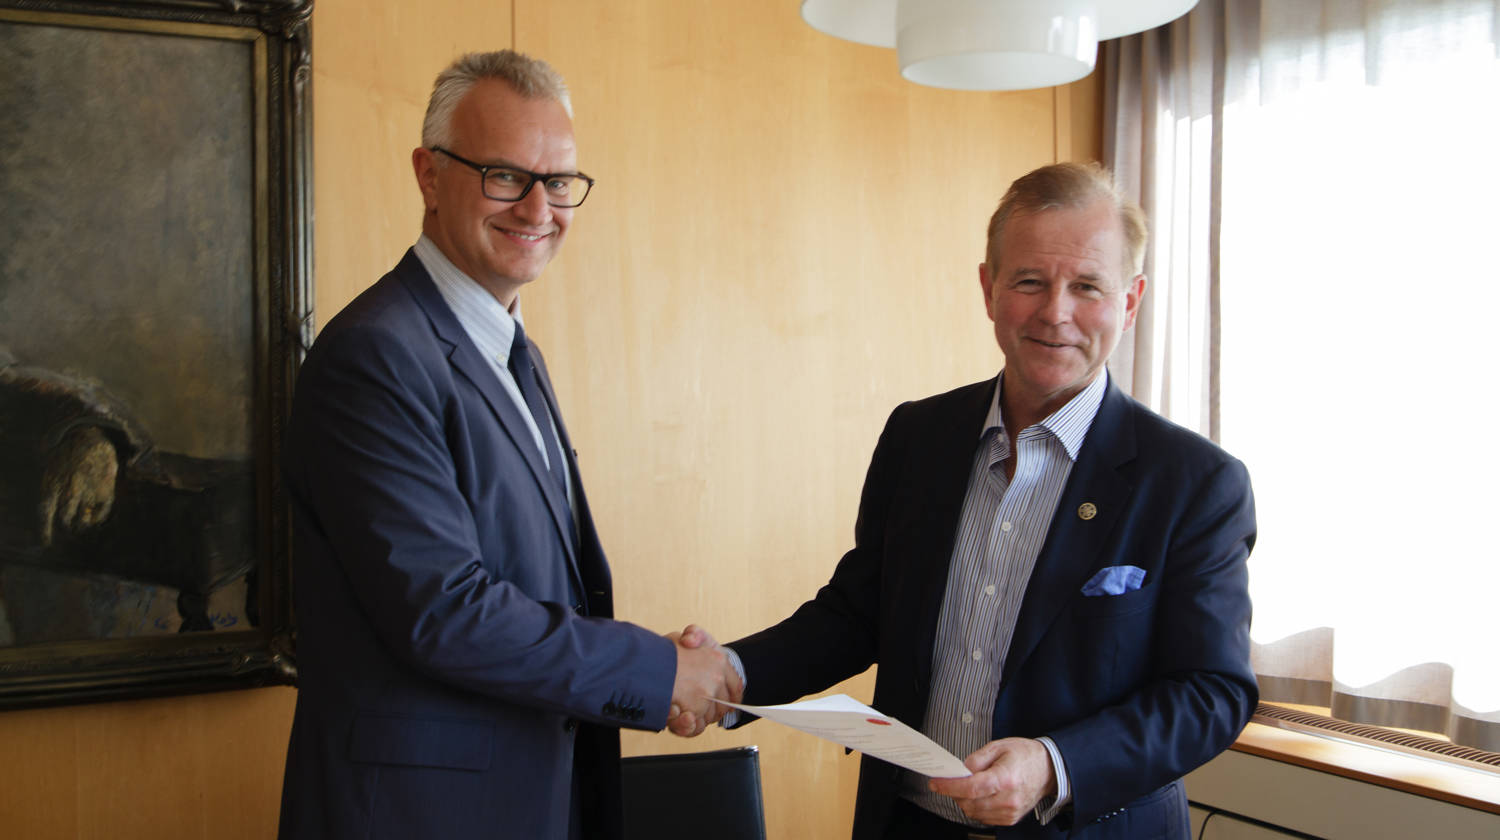 Signing of MoU between PRIO and the University of Oslo 8 Sep 2016, represented by PRIO Director Kristian Berg Haprviken and the Rector of Uio, Ole Petter Ottersen. Photo: Martin Tegnander / PRIO